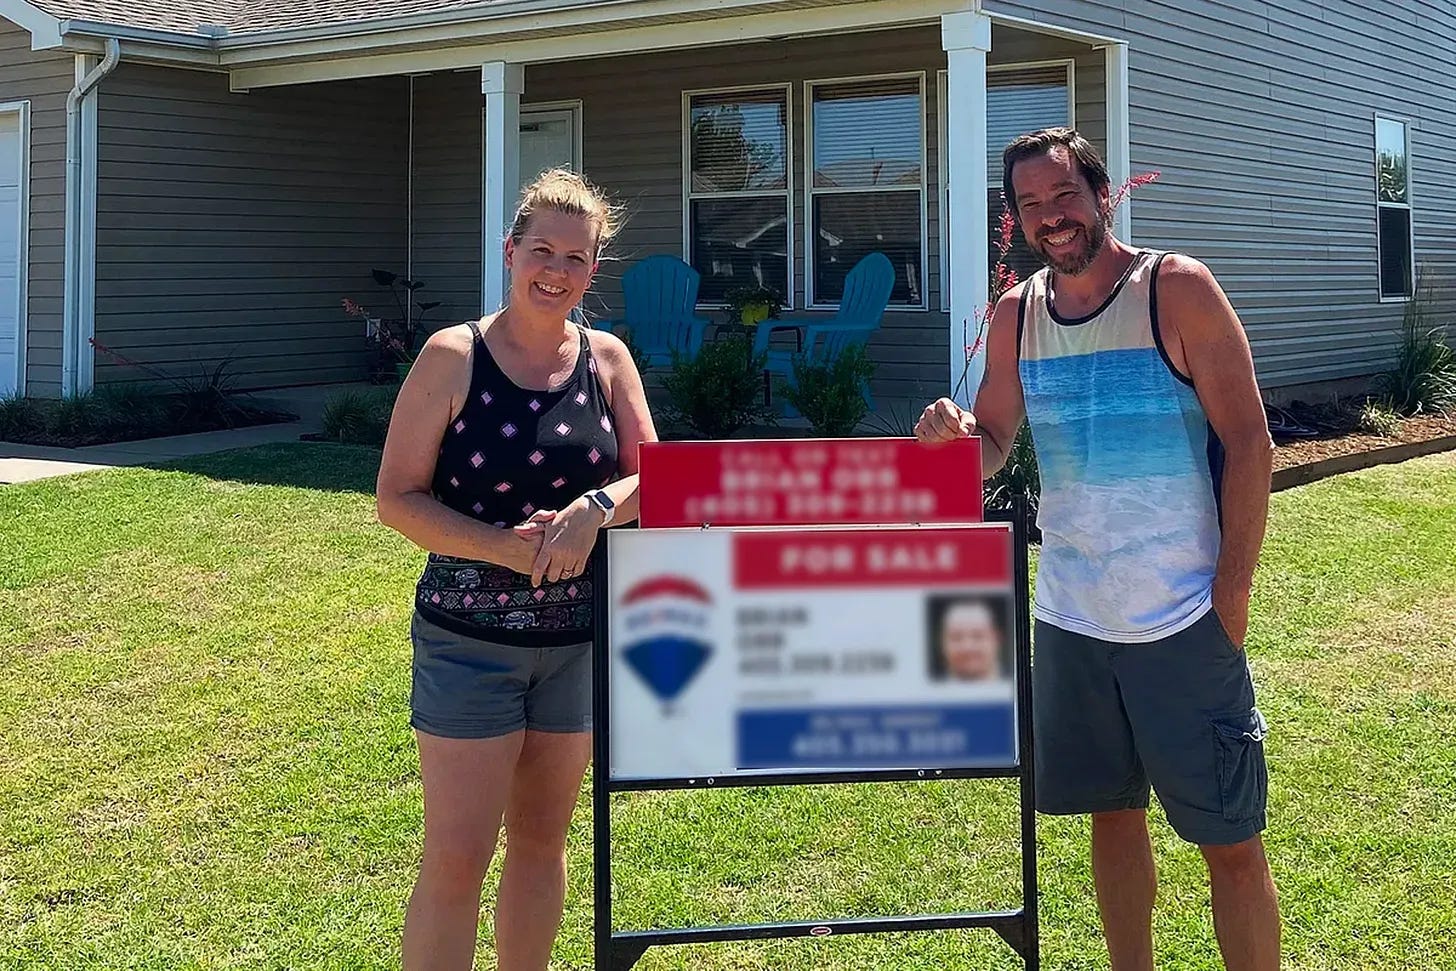 Donetta and James stand in front of the house for sale sign.